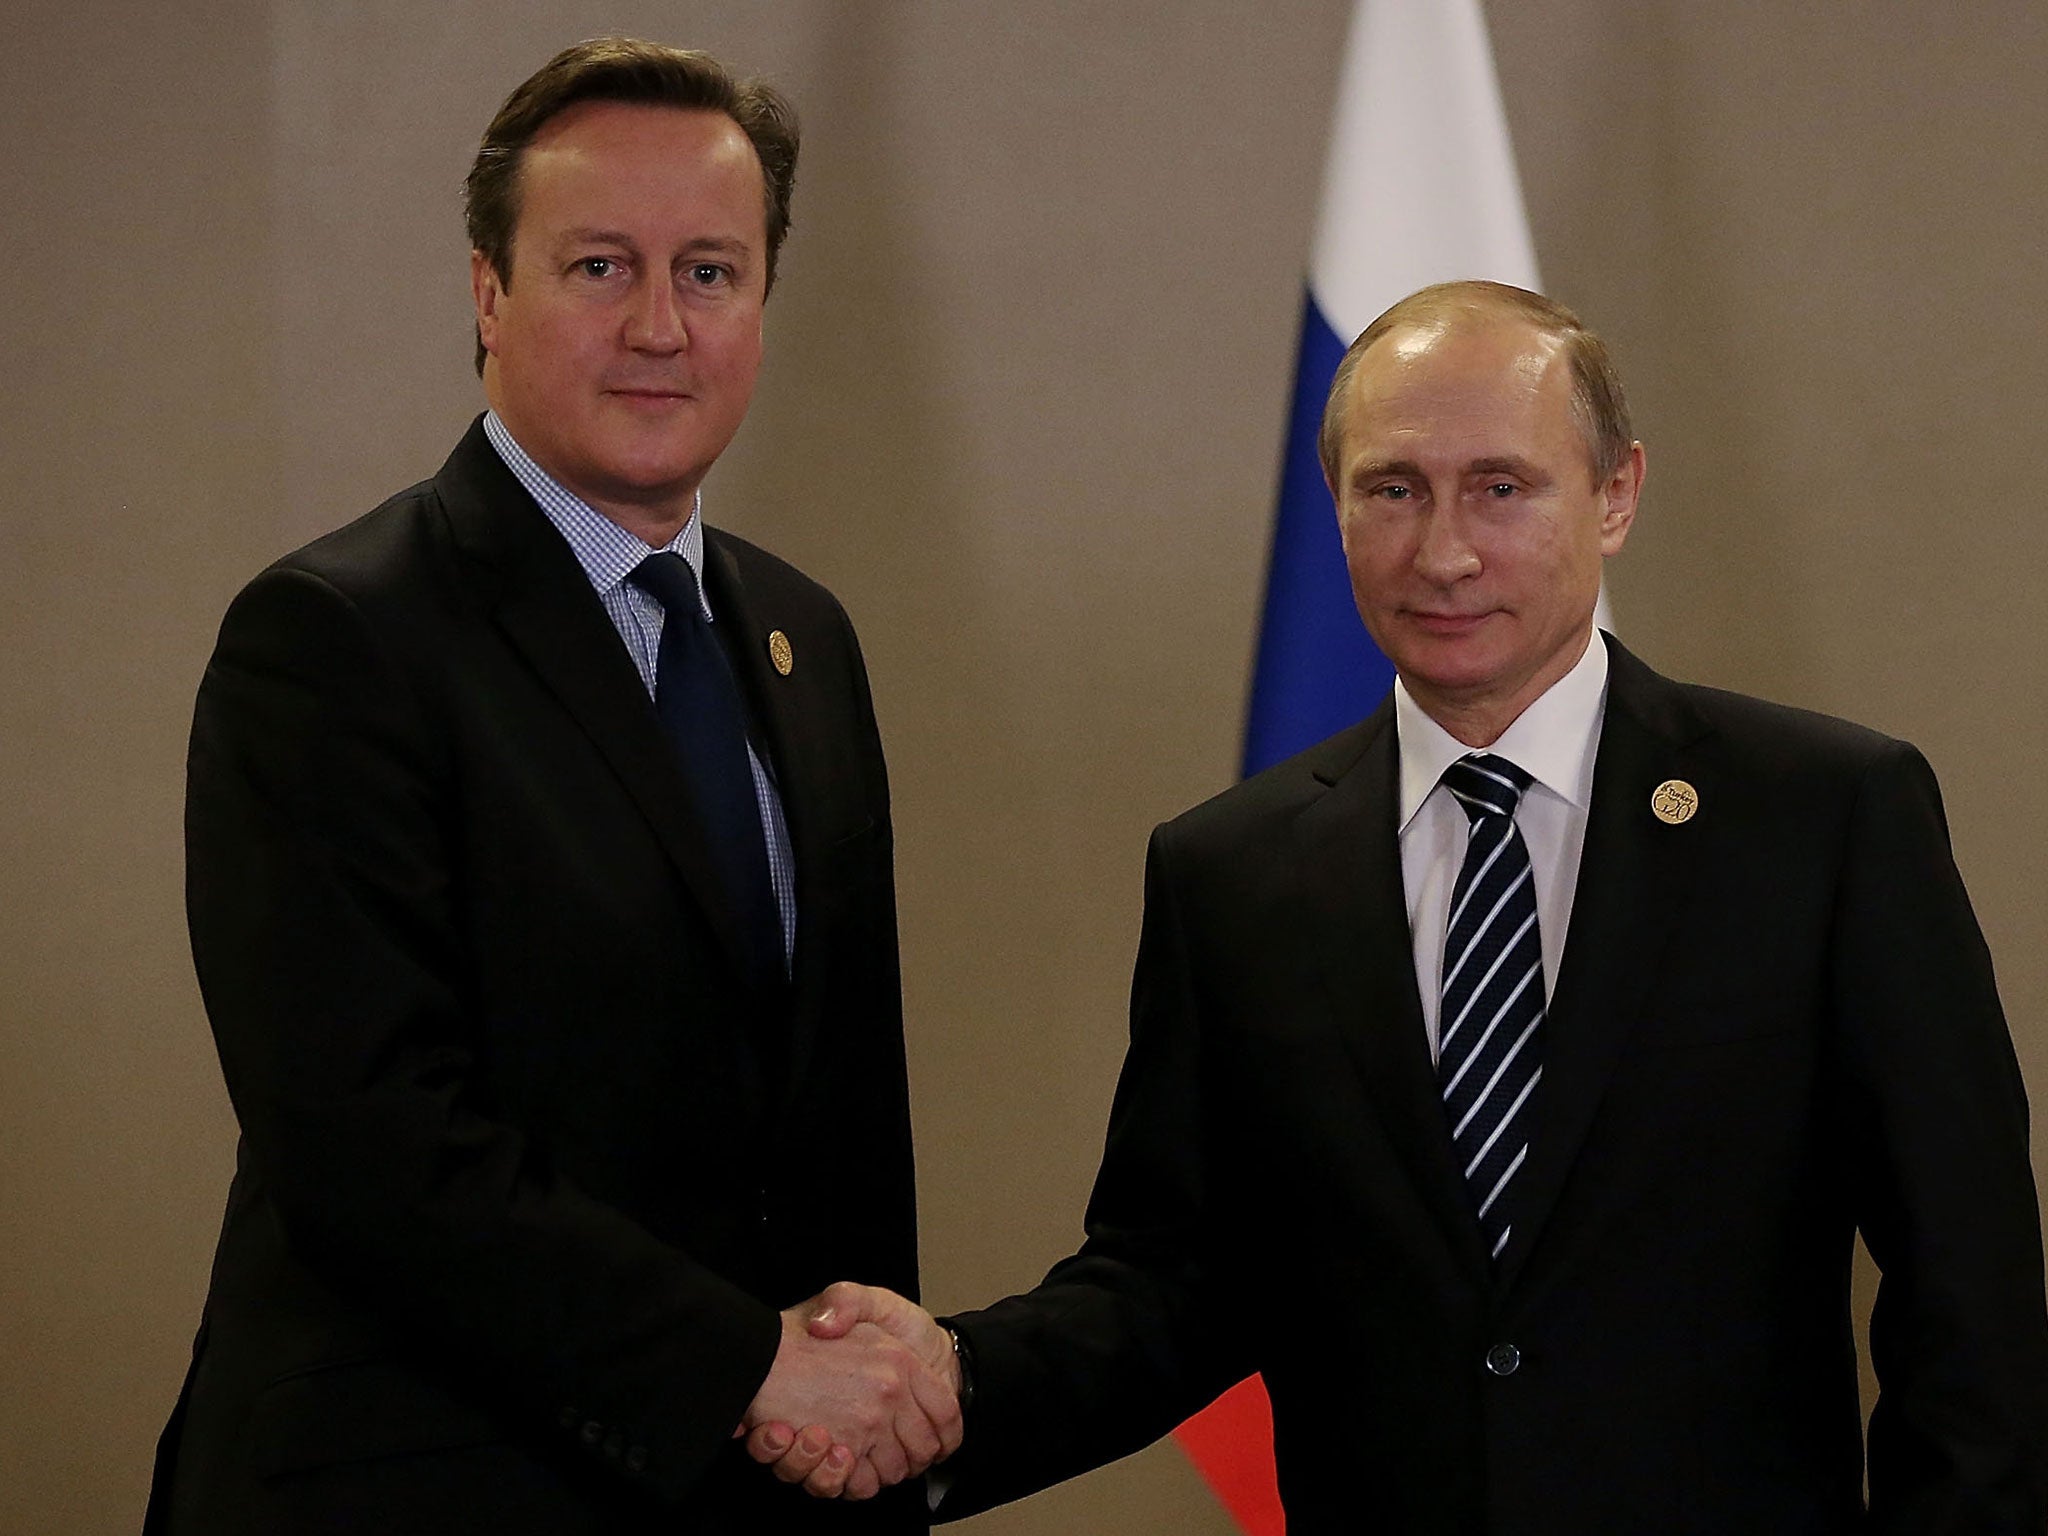 David Cameron and Vladimir Putin previously said they would 'work together' in Syria